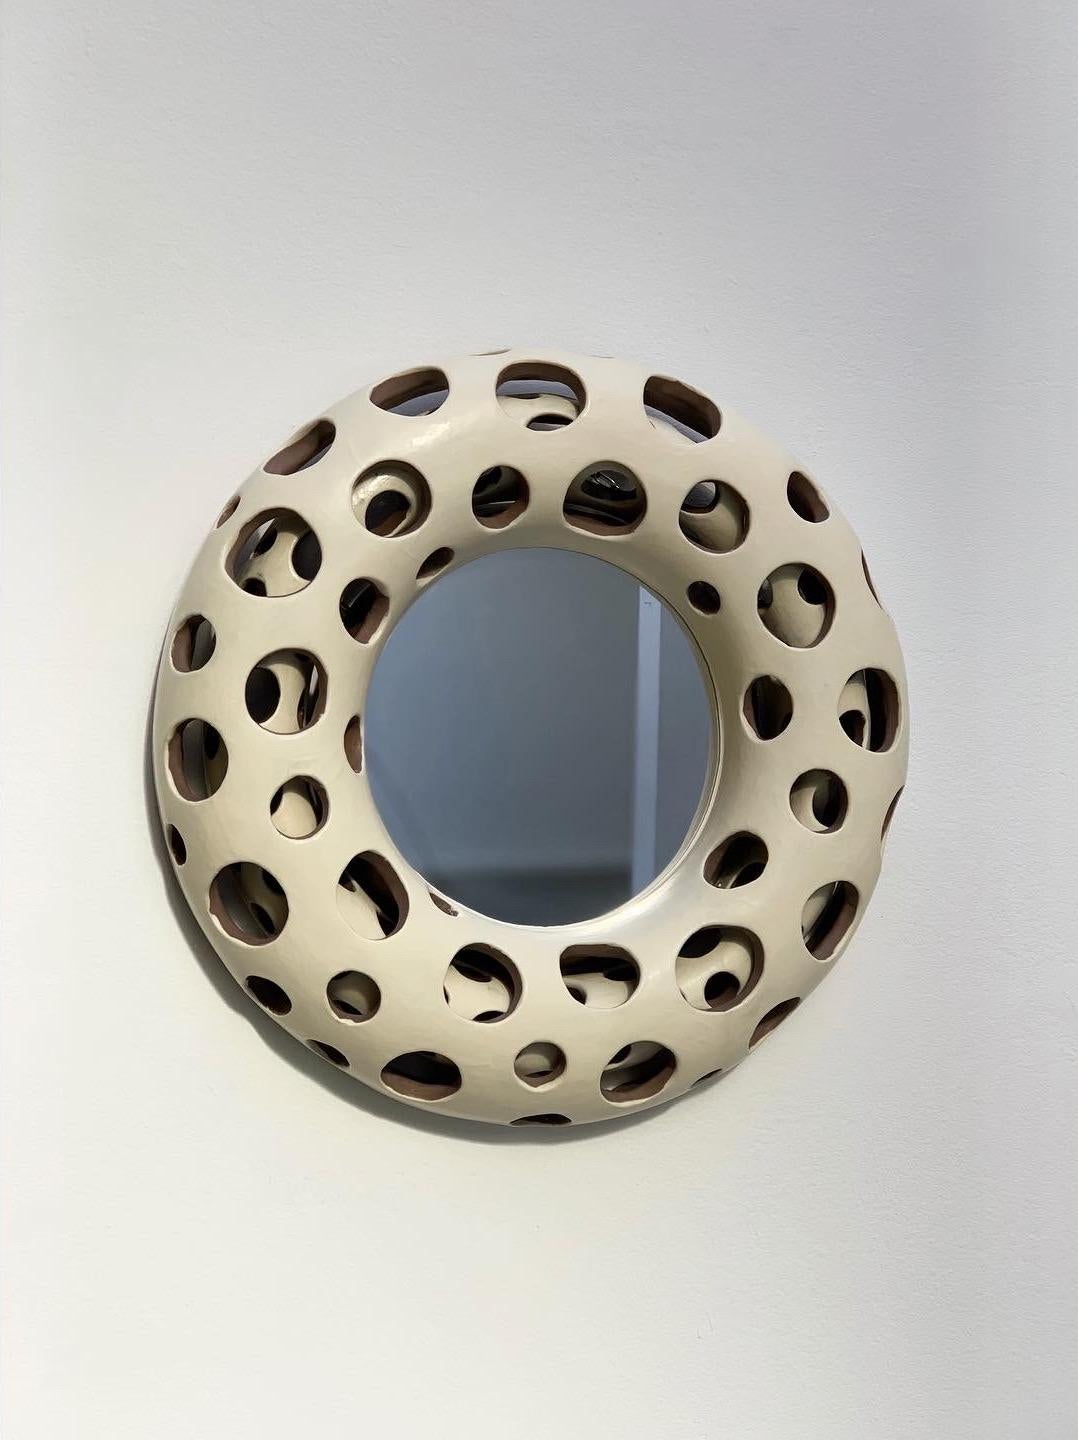 Agnès Debizet
Mirror Bulles, 2021
Material: Glazed earthenware
Dimension: ø 46 cm
In this moulded shapes made of two ceramic layers from hand-built pieces, the whole surface is entirely carved out by hand. Resulting from a limited edition